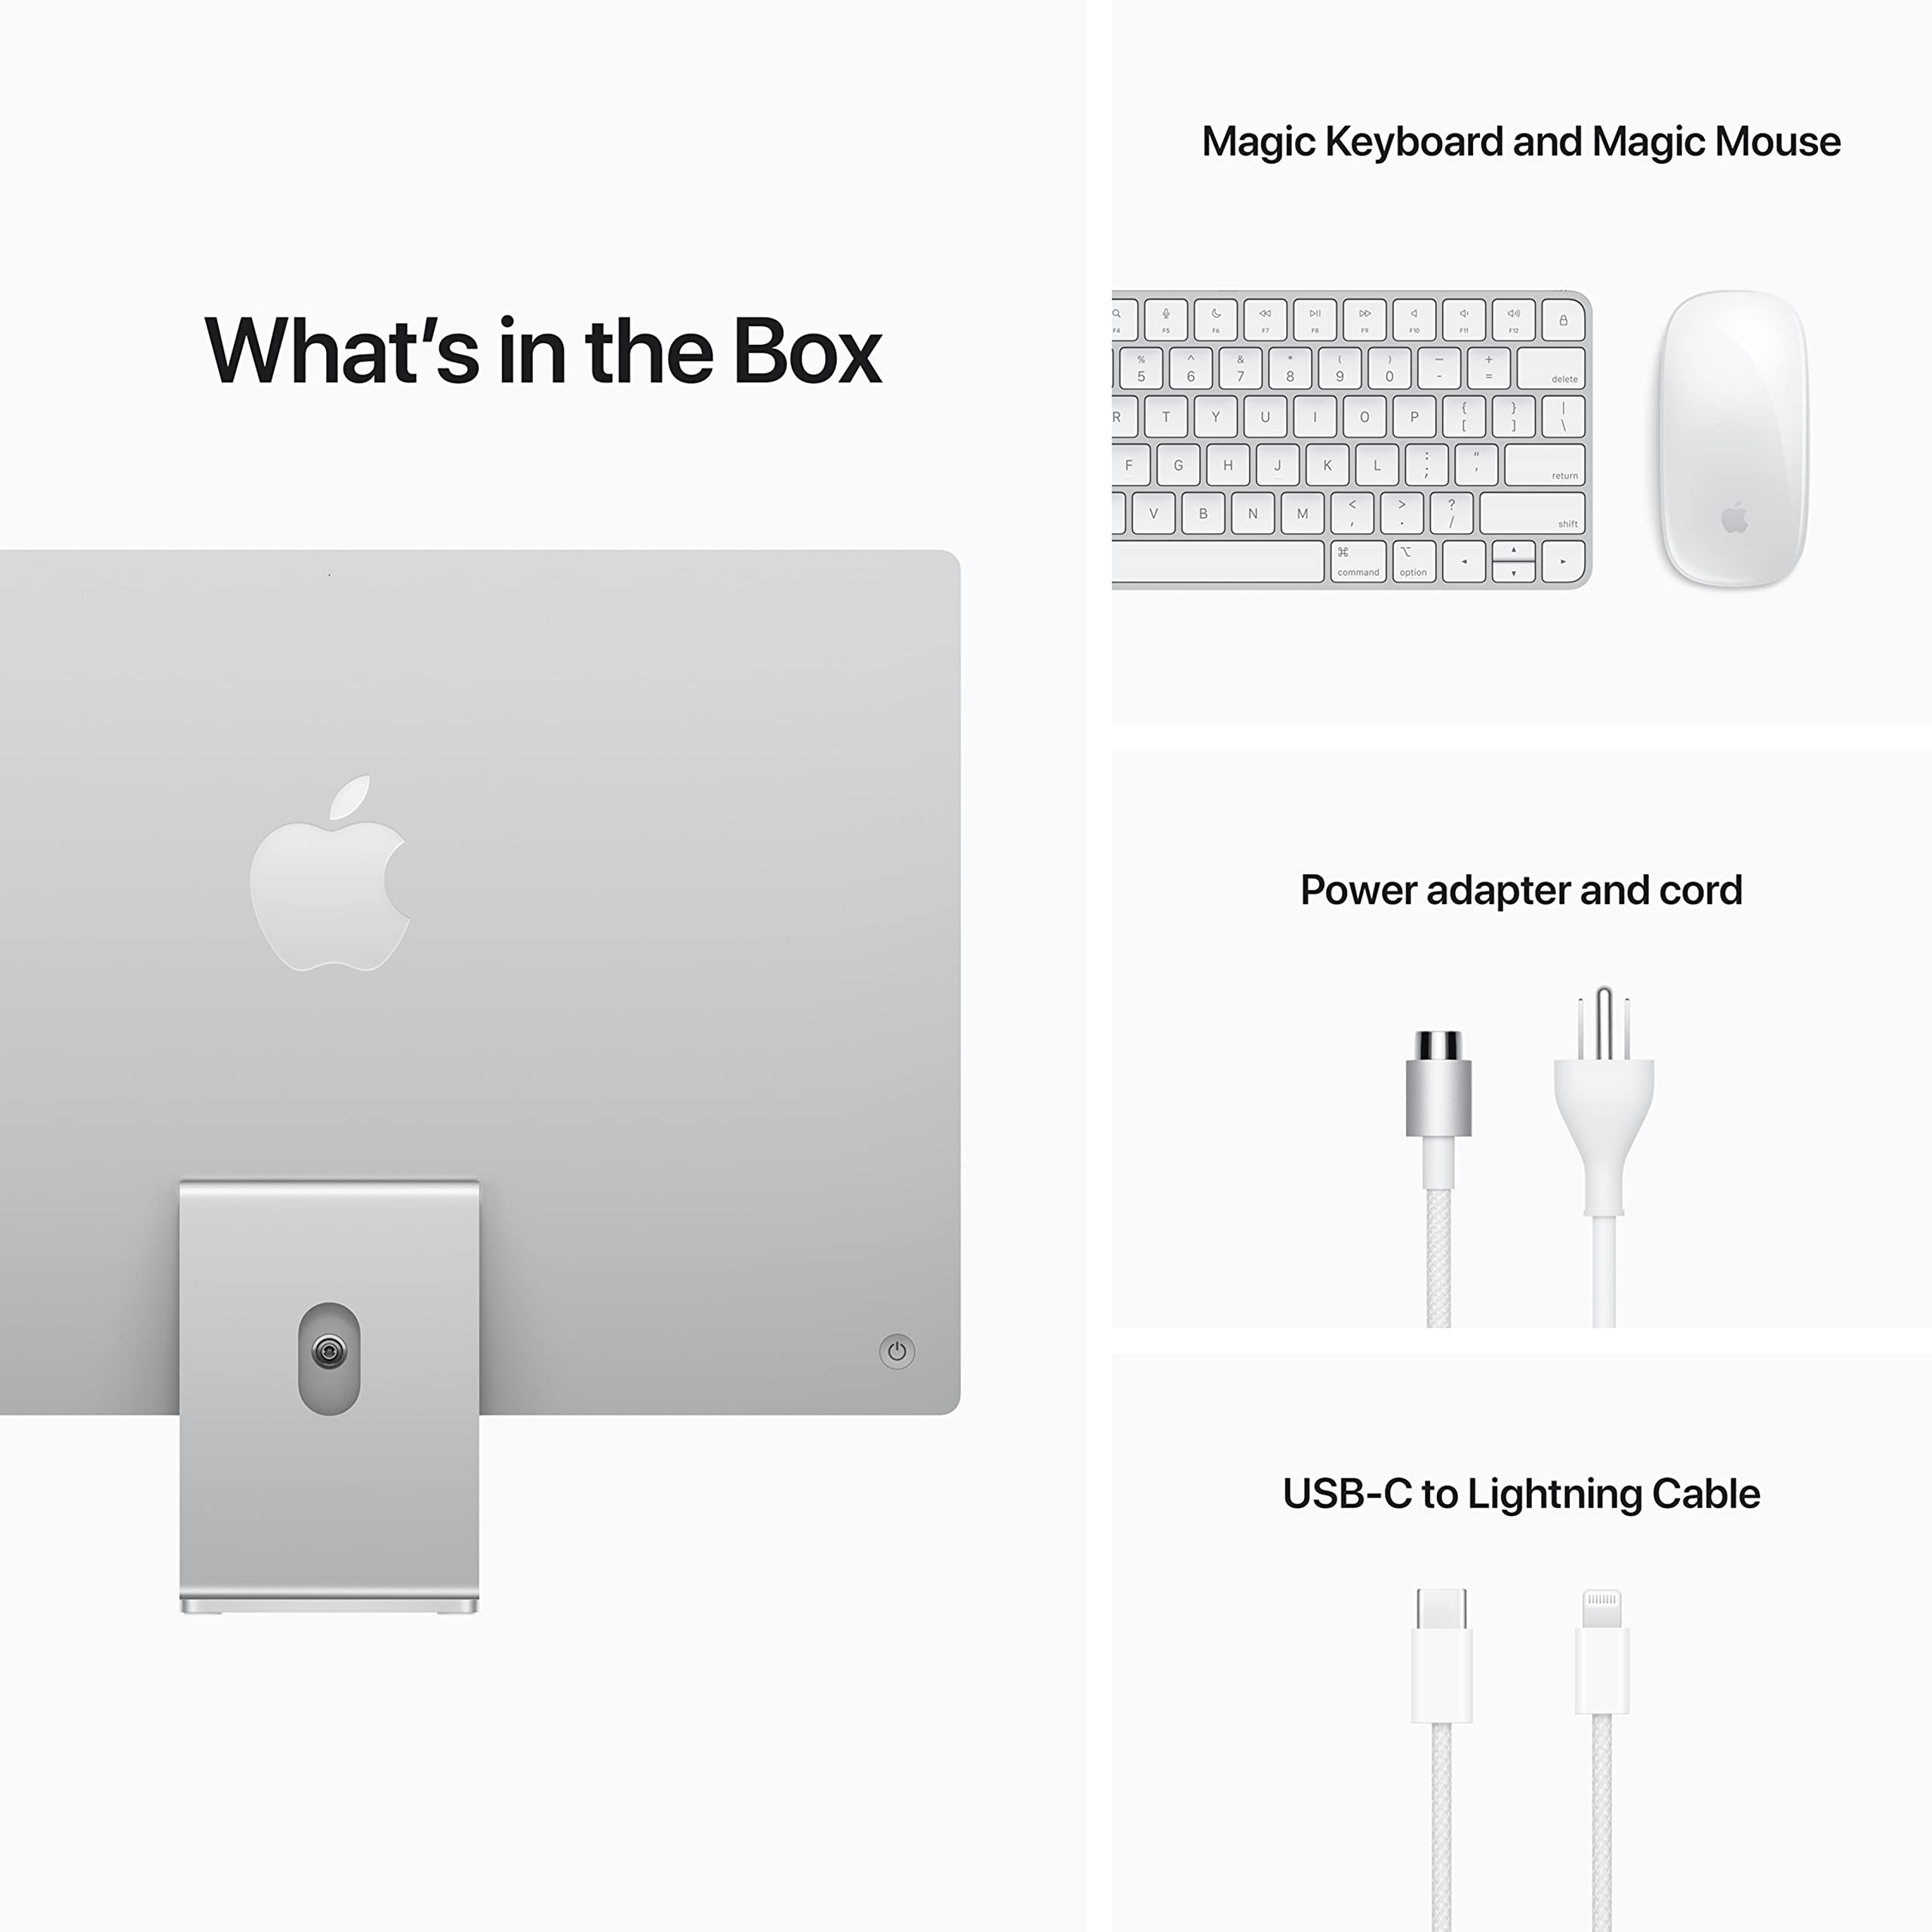 Apple 2021 iMac All in one Desktop Computer with M1 chip: 8-core CPU, 7-core GPU, 24-inch Retina Display, 8GB RAM, 256GB SSD Storage, Matching Accessories. Works with iPhone/iPad; Silver